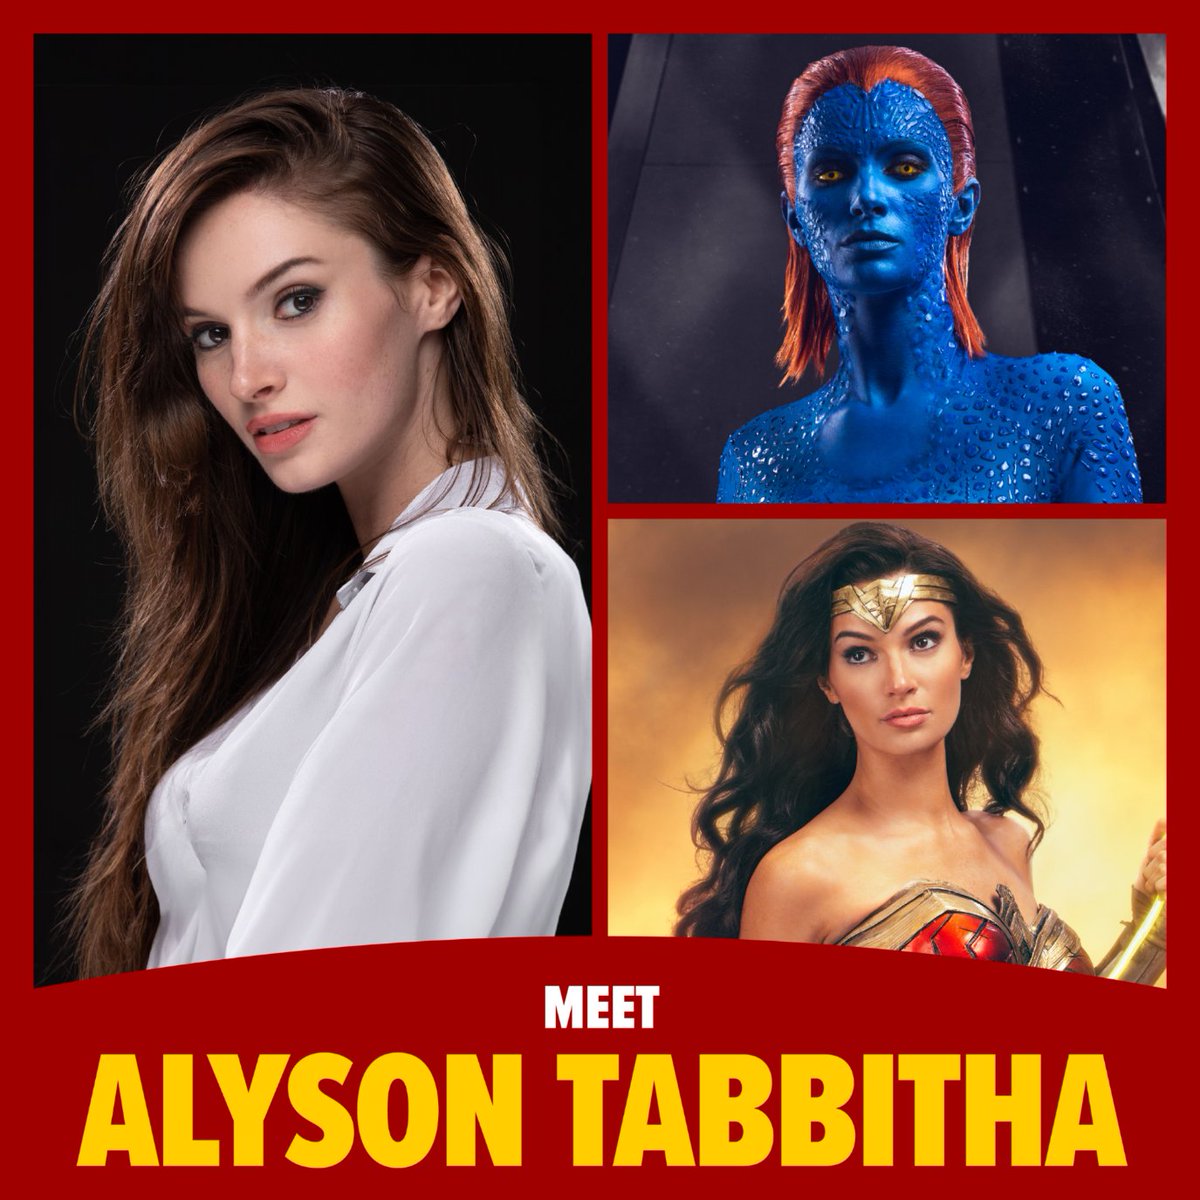 We're so excited to add @AlysonTabbitha to our amazing list of cosplay guests for MEGACON. Catch her incredible looks next month in Orlando. Grab your tickets today. spr.ly/6015rgC3P